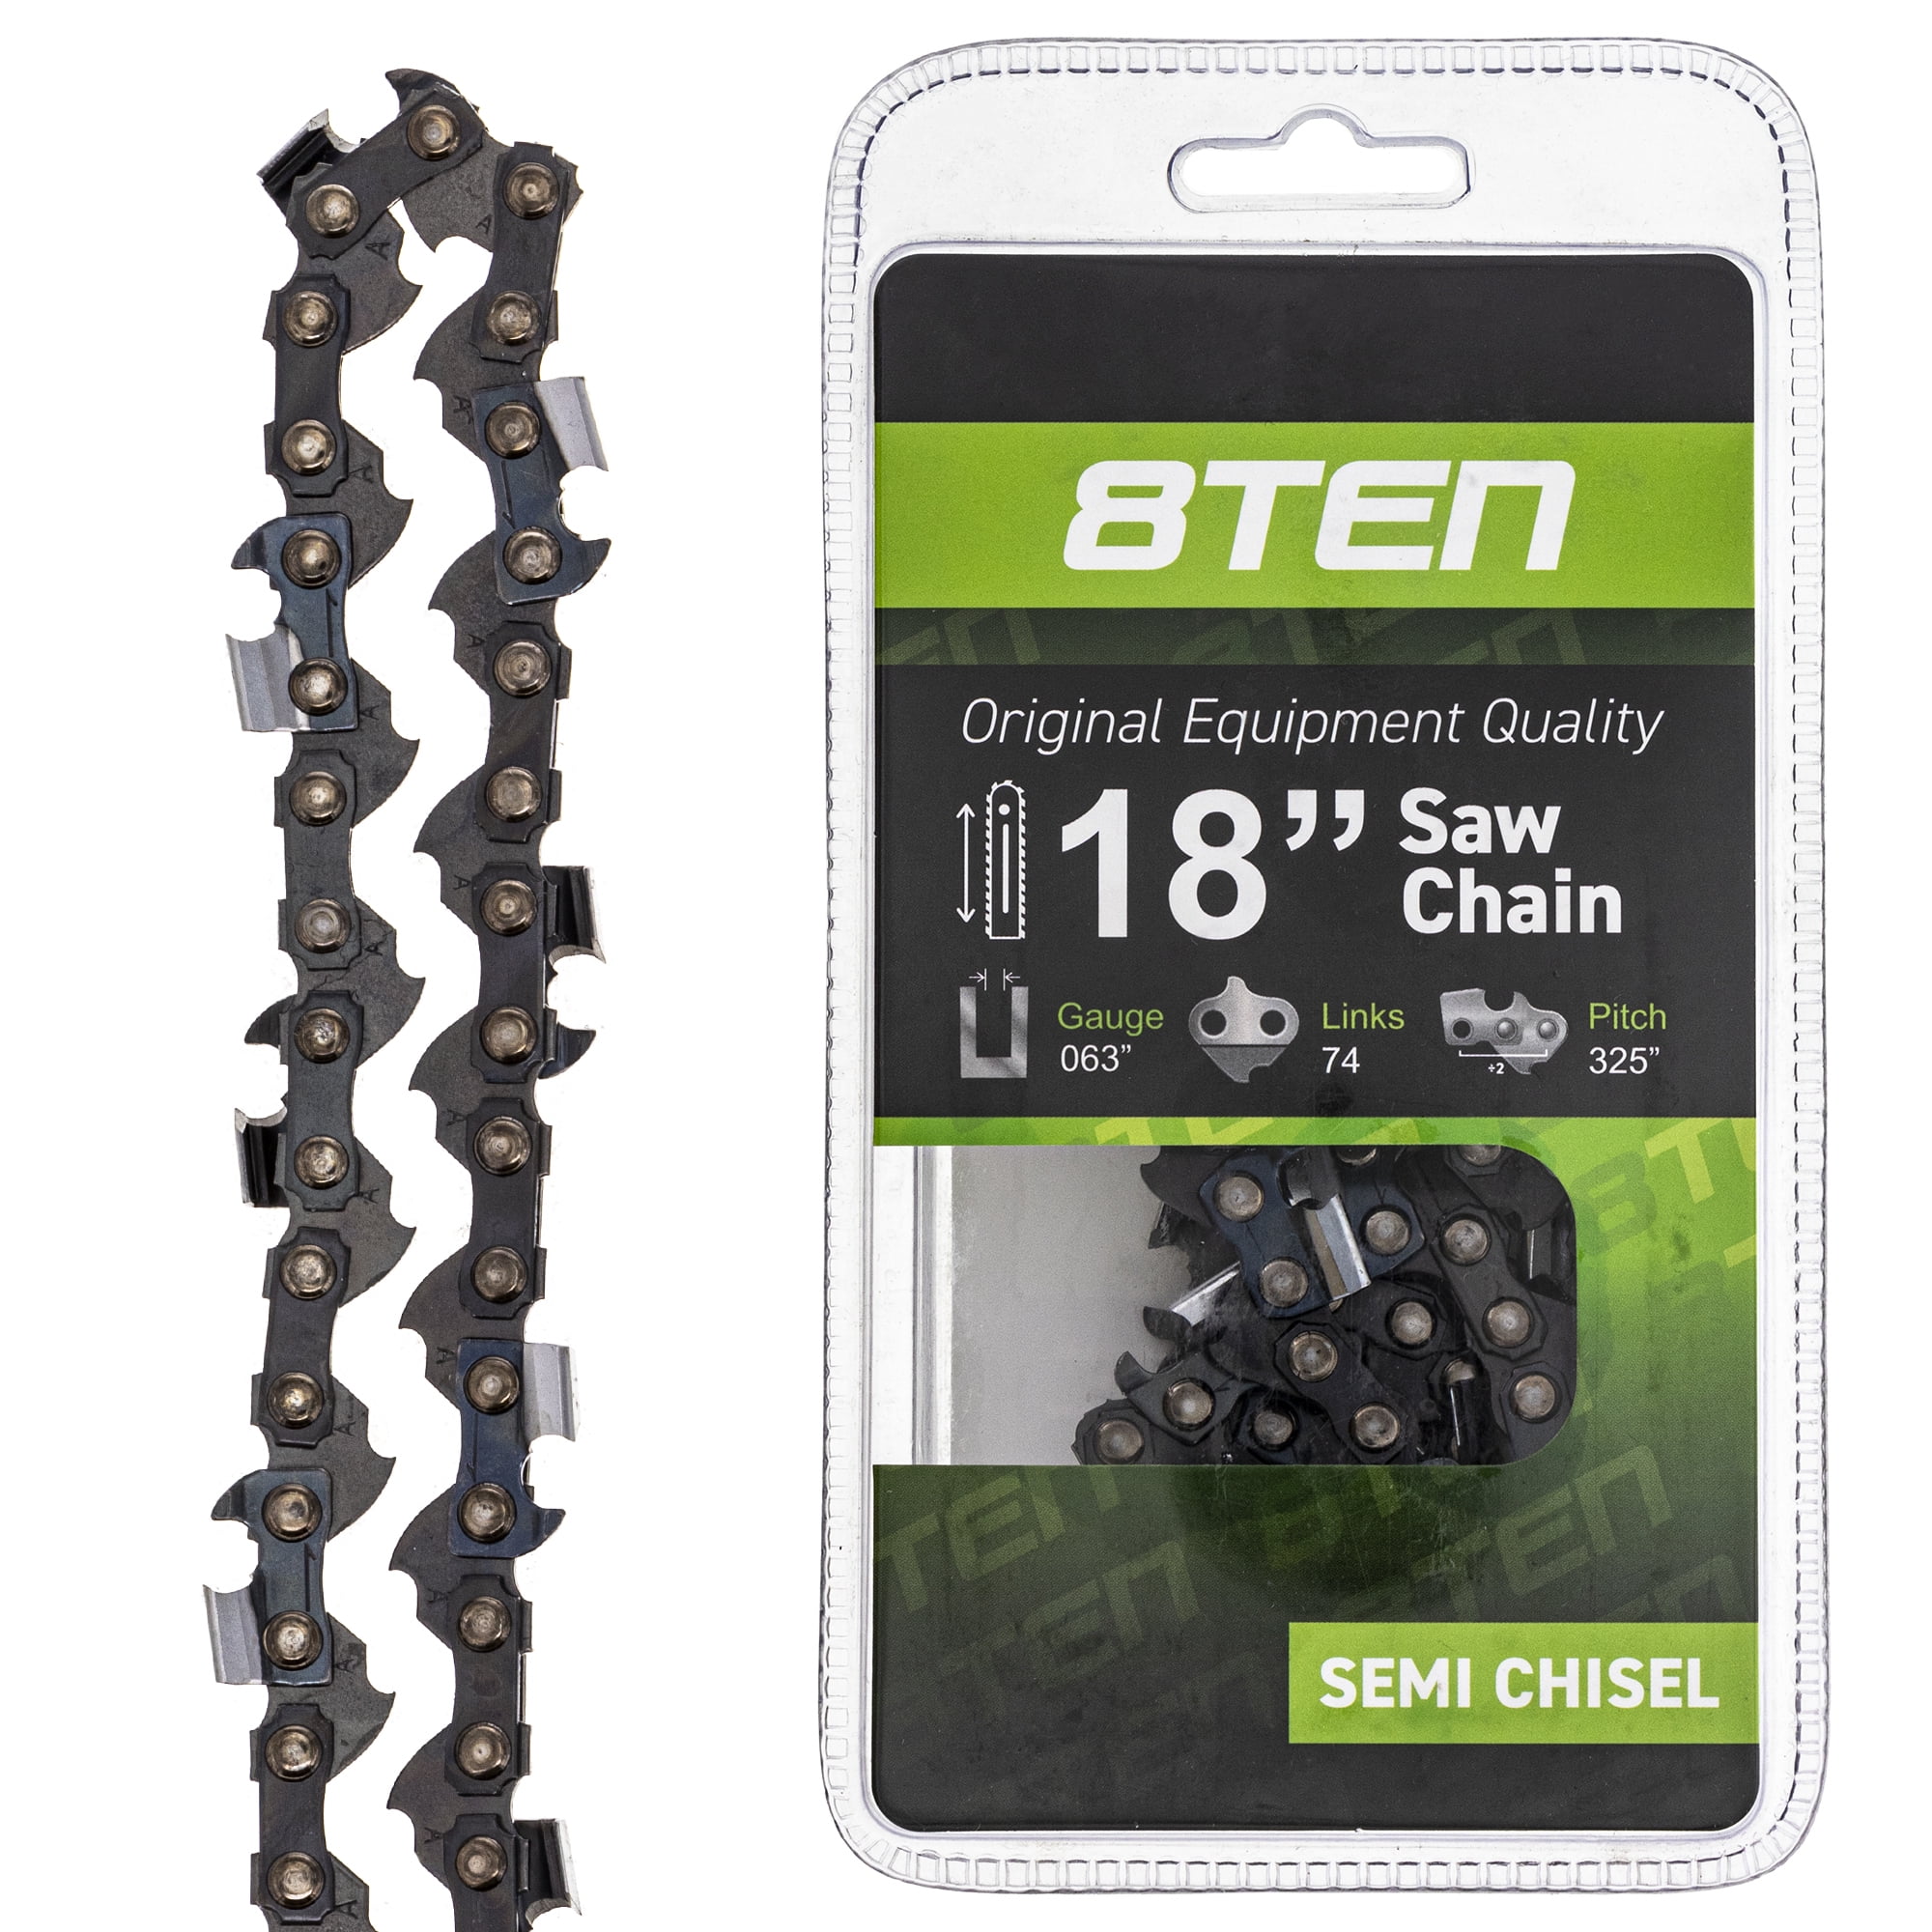 OREGON 16 in Guide Bar Chain Combo 3/8 LP Pitch 56 DL Chainsaw Replacement Parts 